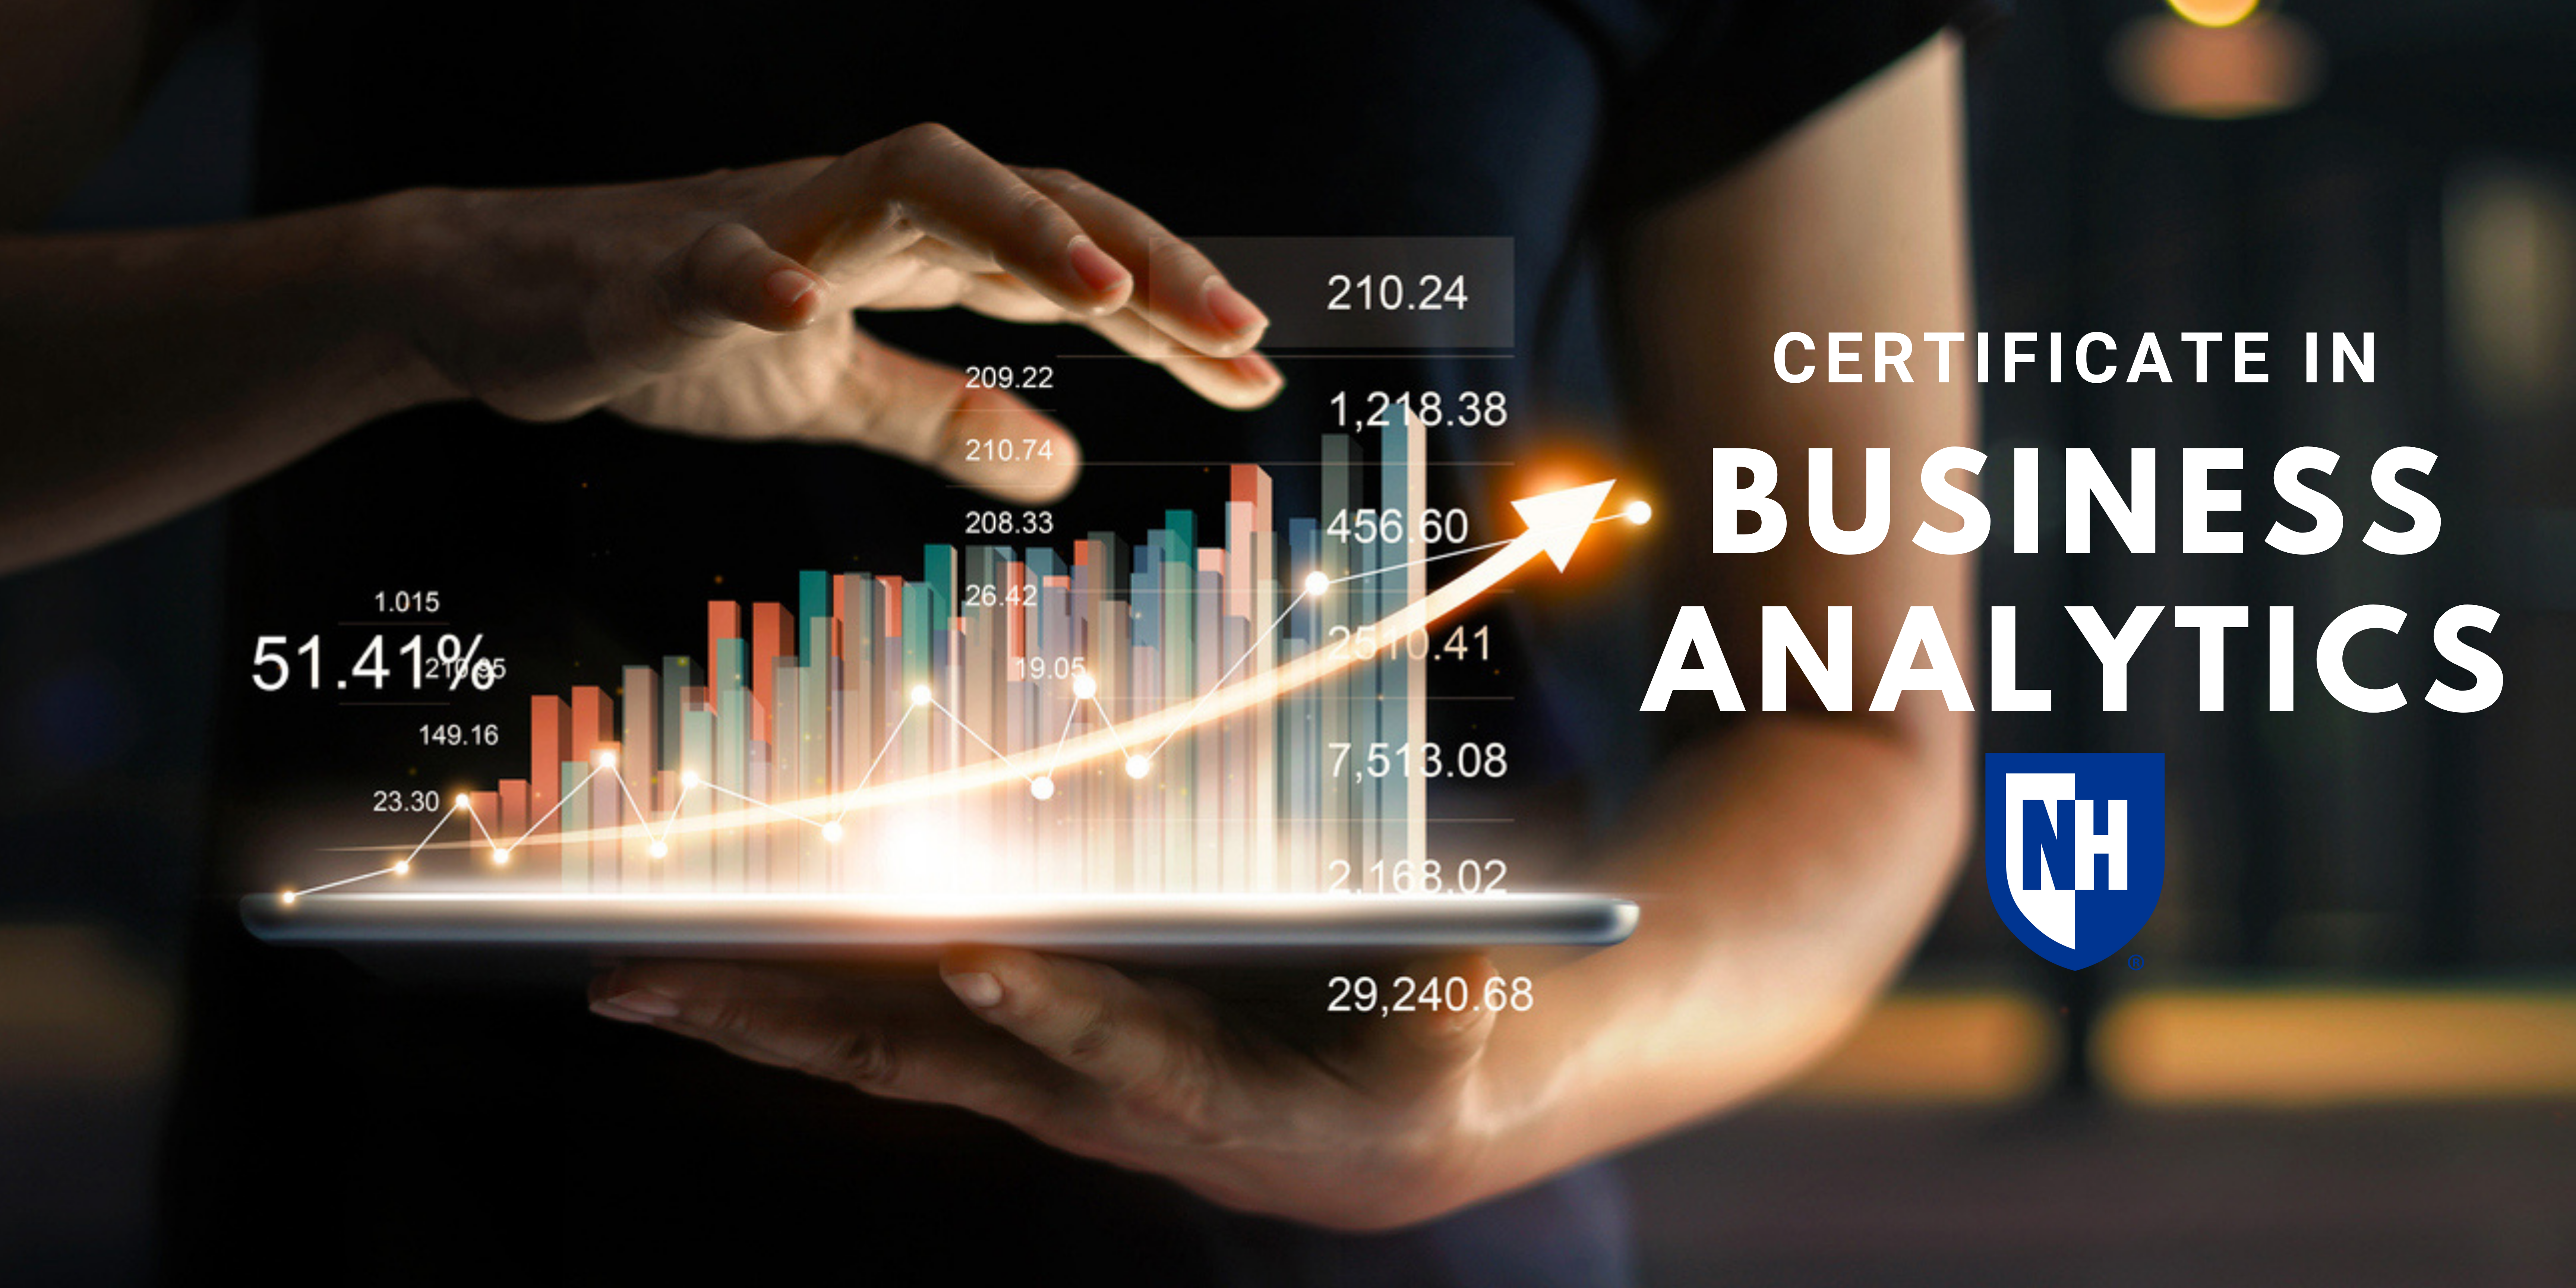 Certificate in Business Analytics